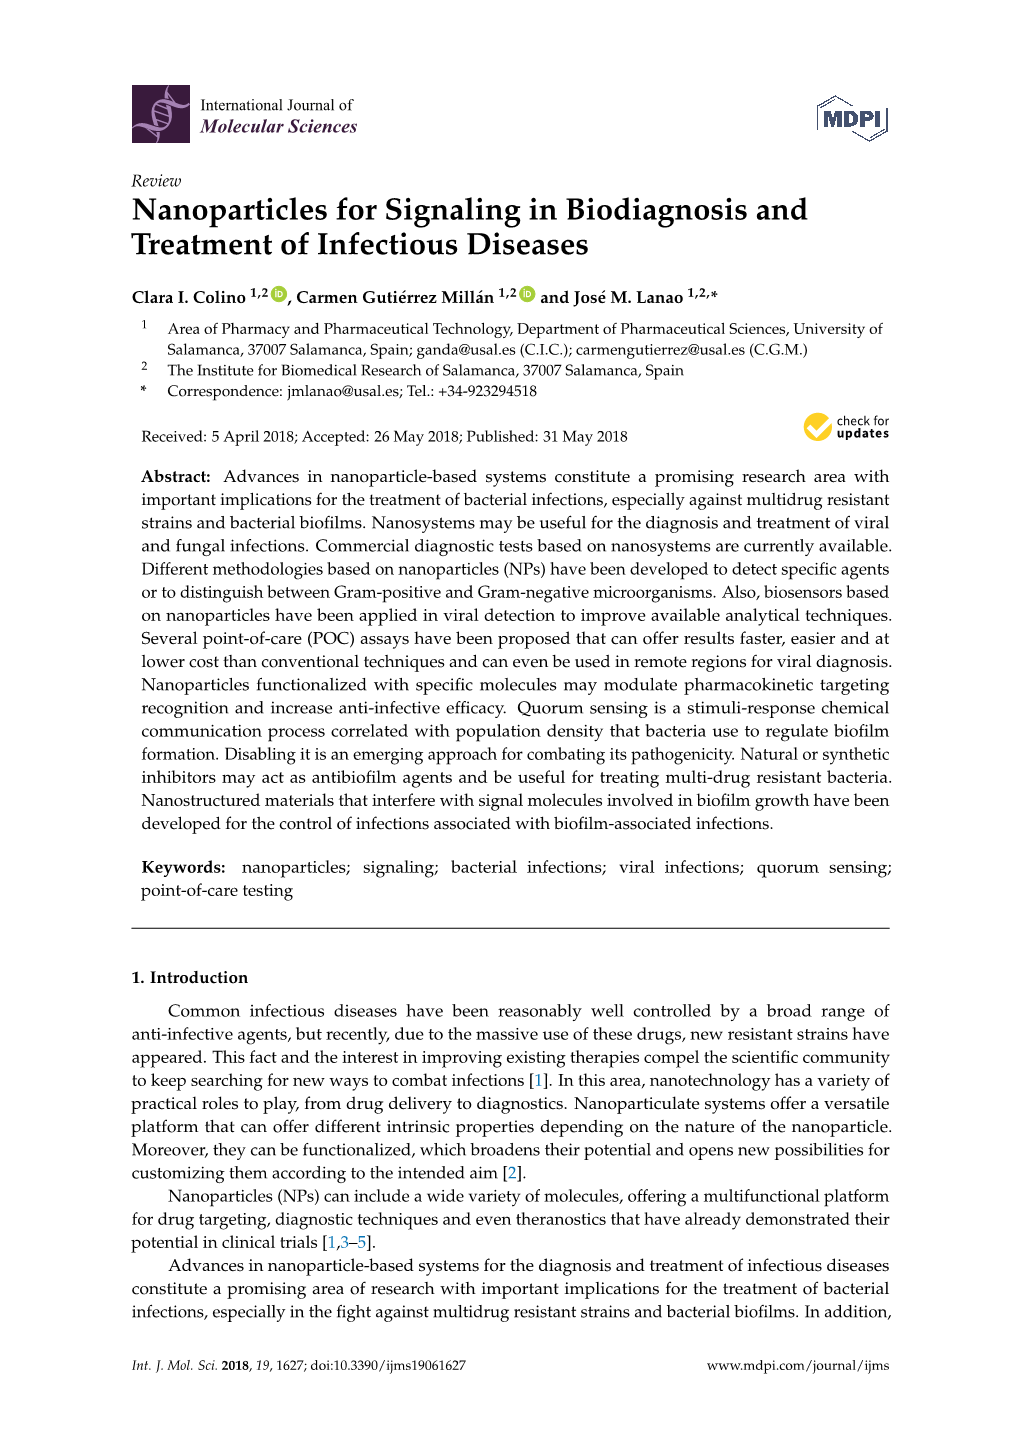 Nanoparticles for Signaling in Biodiagnosis and Treatment of Infectious Diseases